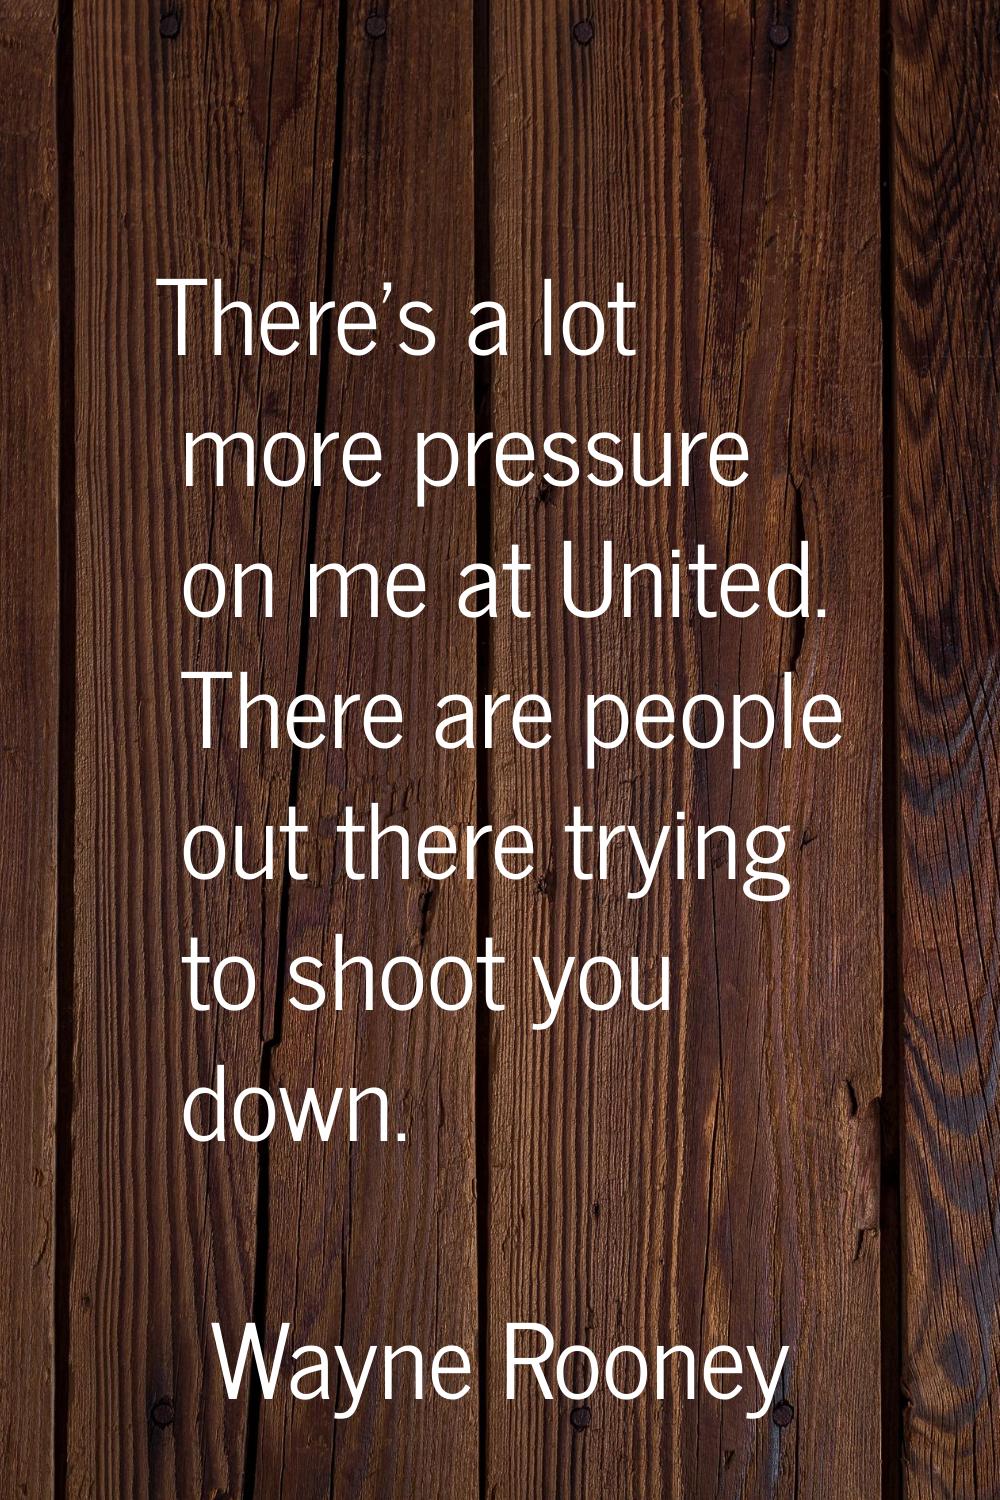 There's a lot more pressure on me at United. There are people out there trying to shoot you down.